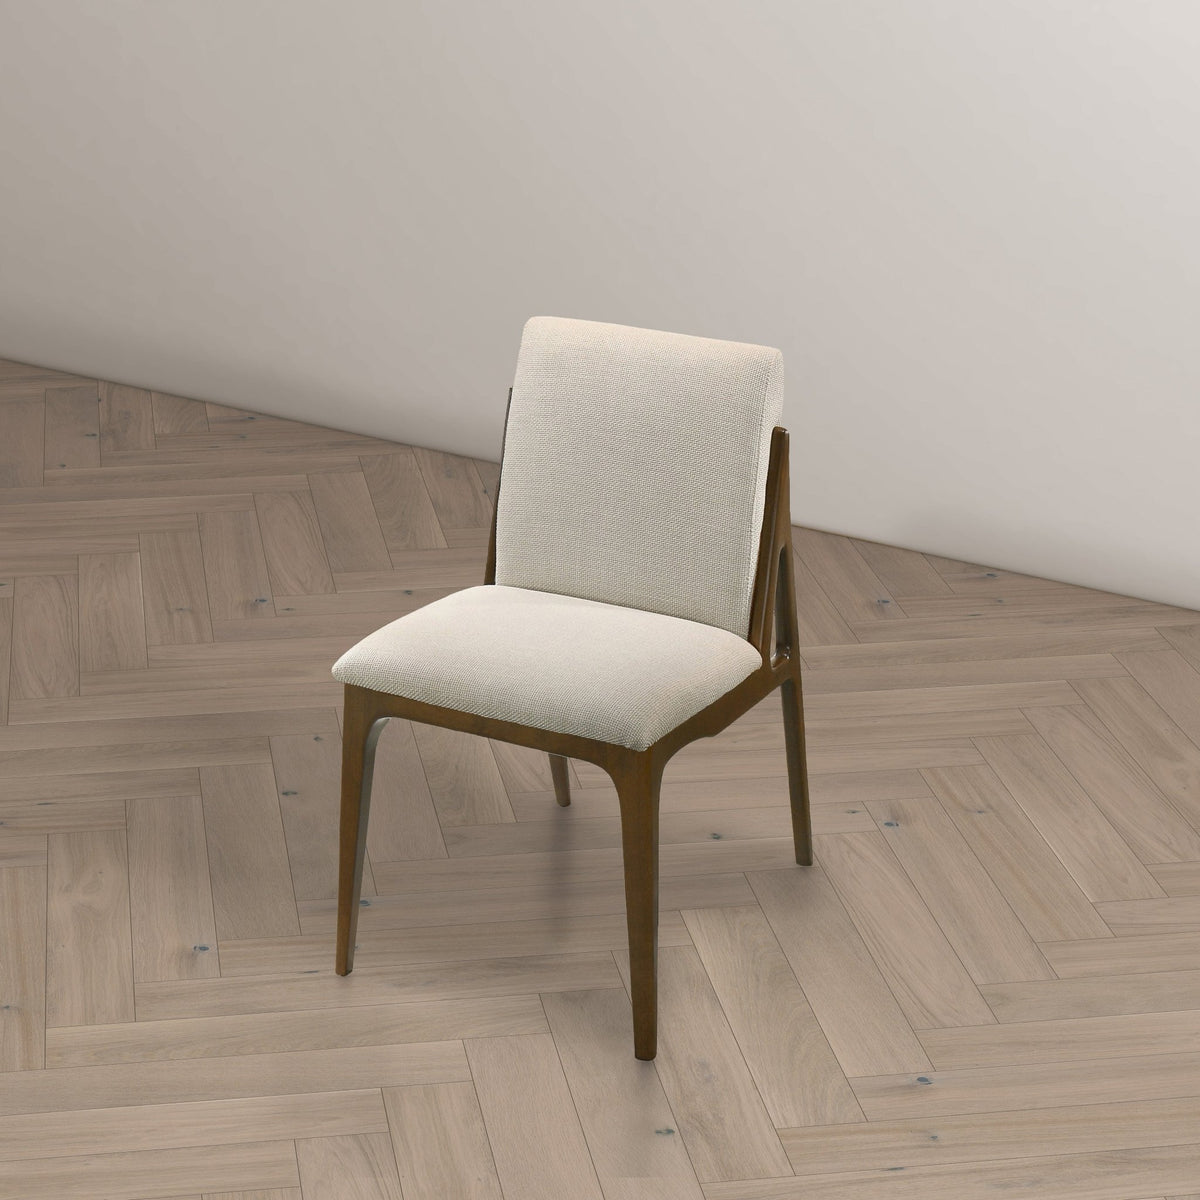 Griffin Cream Fabric Dining Chair - MidinMod Houston Tx Mid Century Furniture Store - Dining Chairs 7